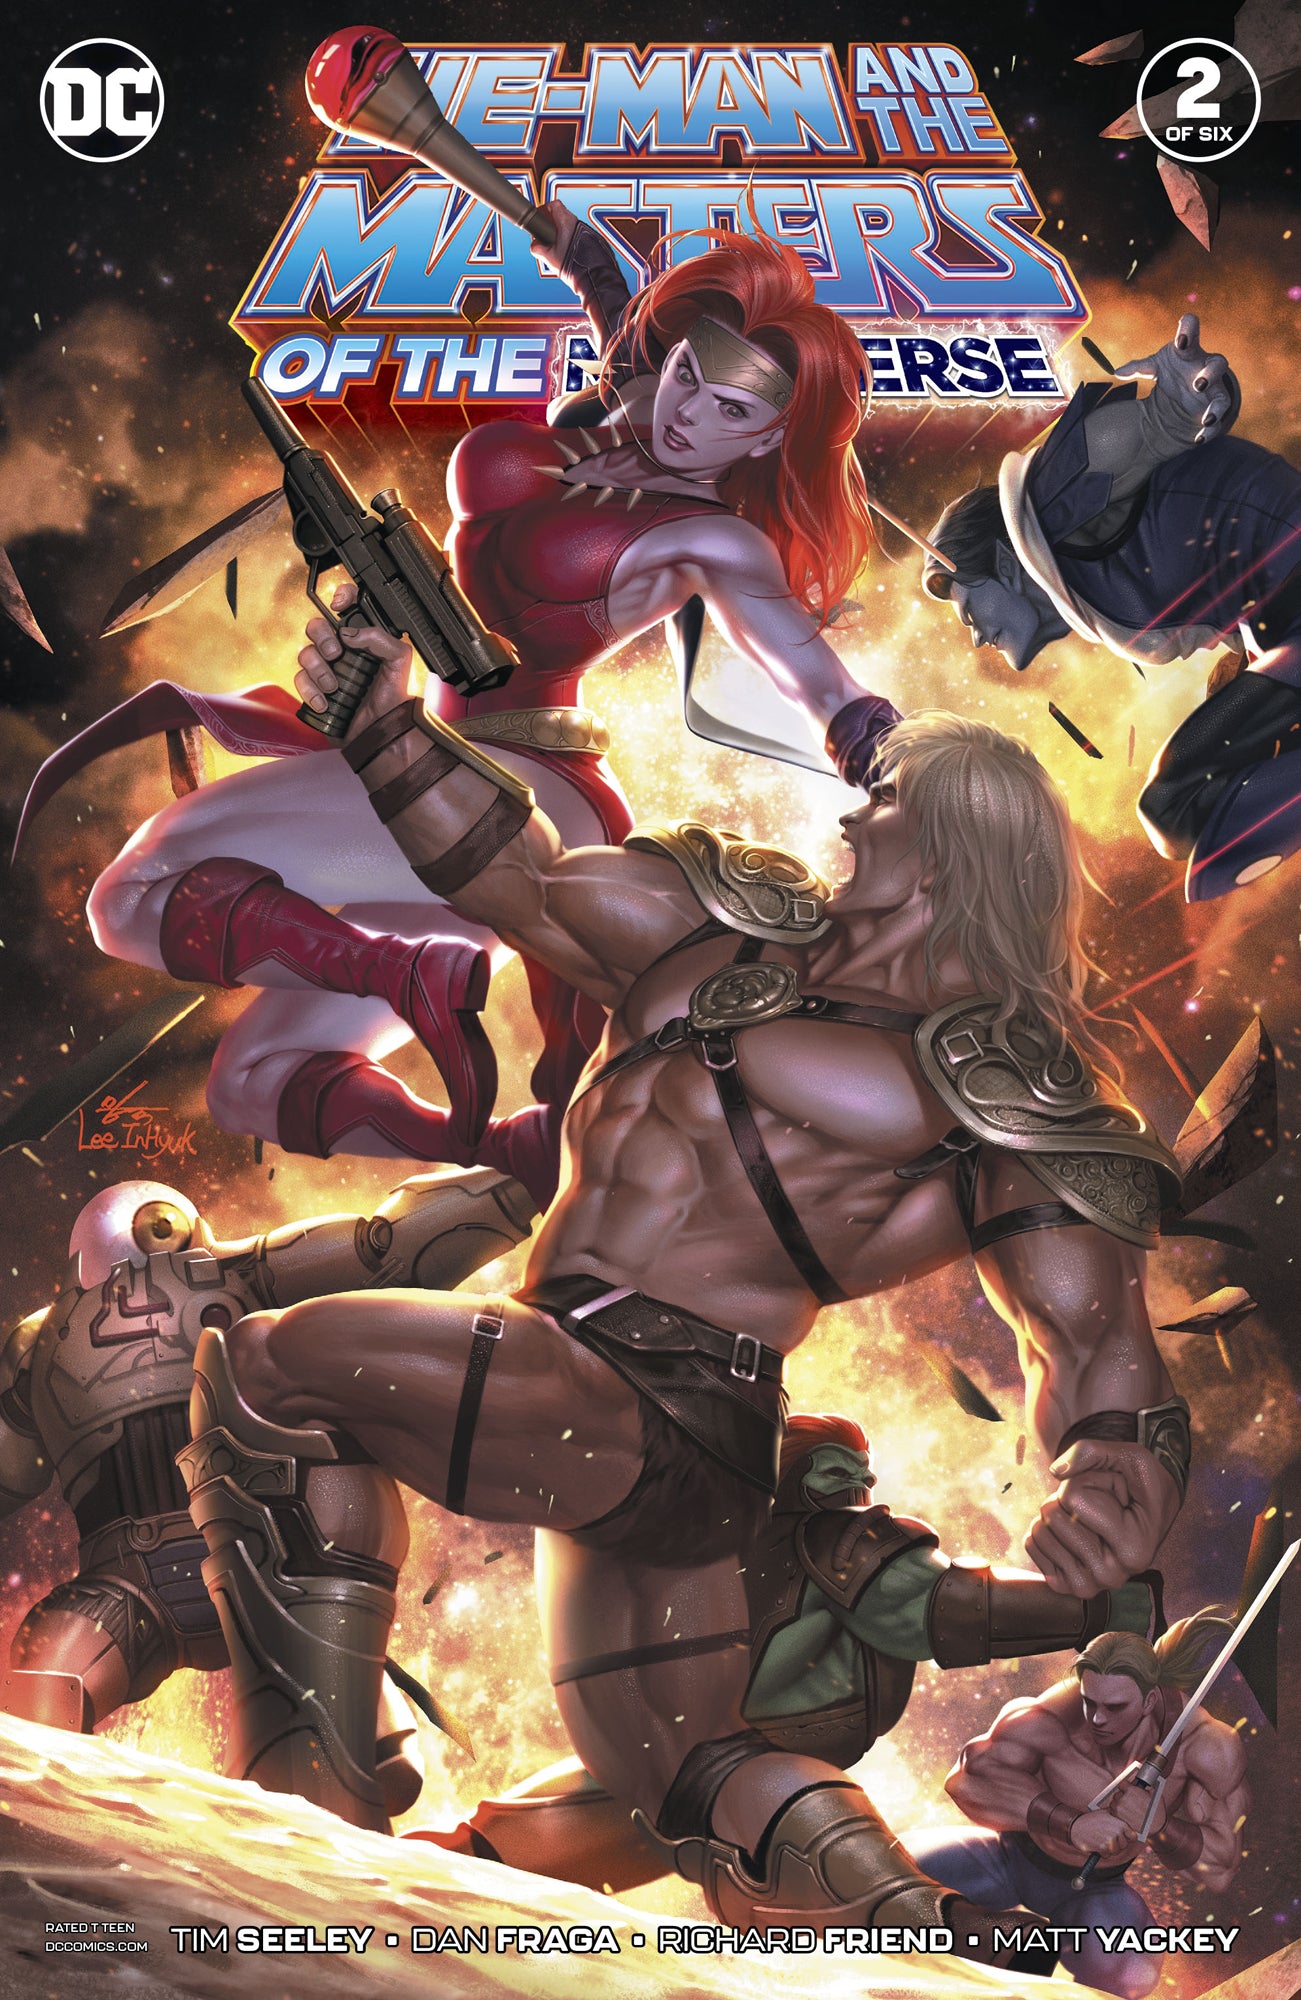 He Man and the Masters of The Multiverse 2 - Heroes Cave